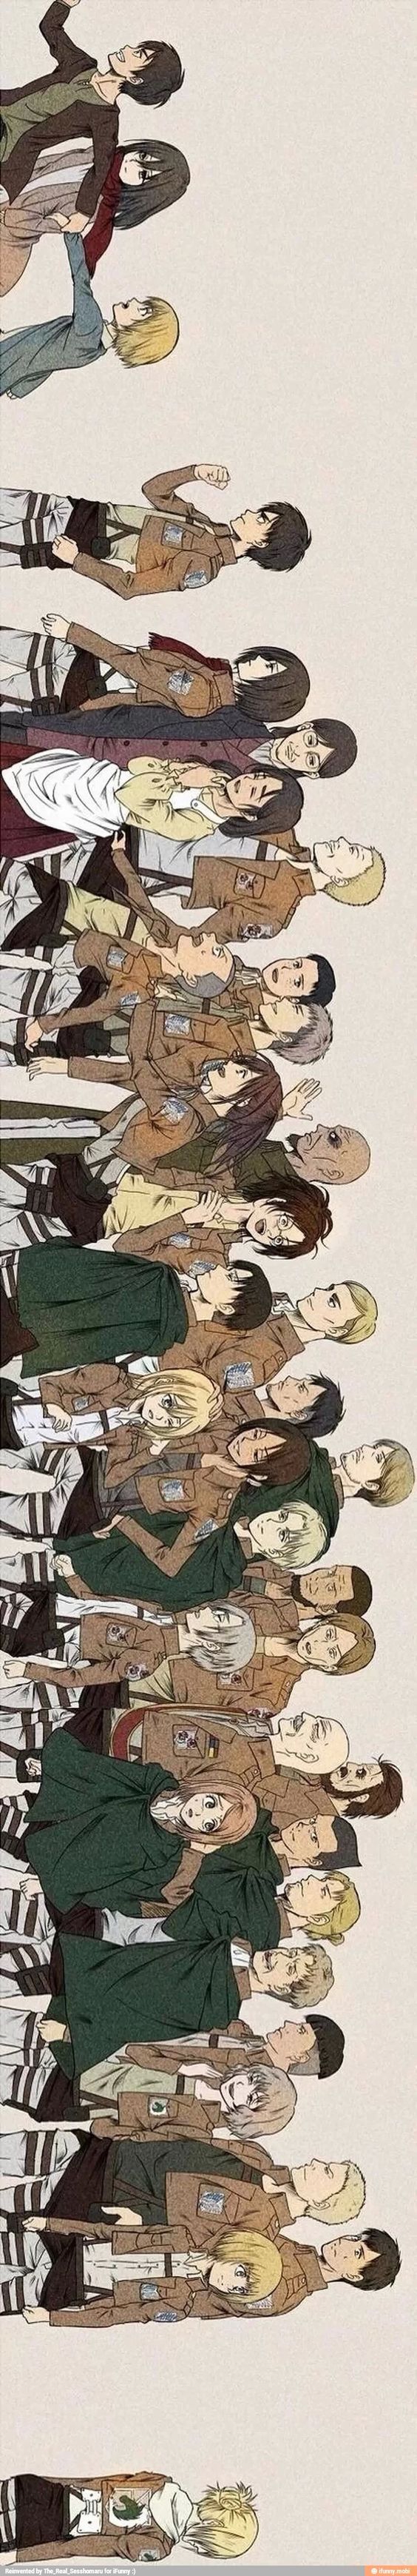 Why 'da hell is Armin back there with Annie?! No way is he being shipped with her! Armin is way to cute for her with her long nose! She killed so many people and should be dead. She is a DEMON!